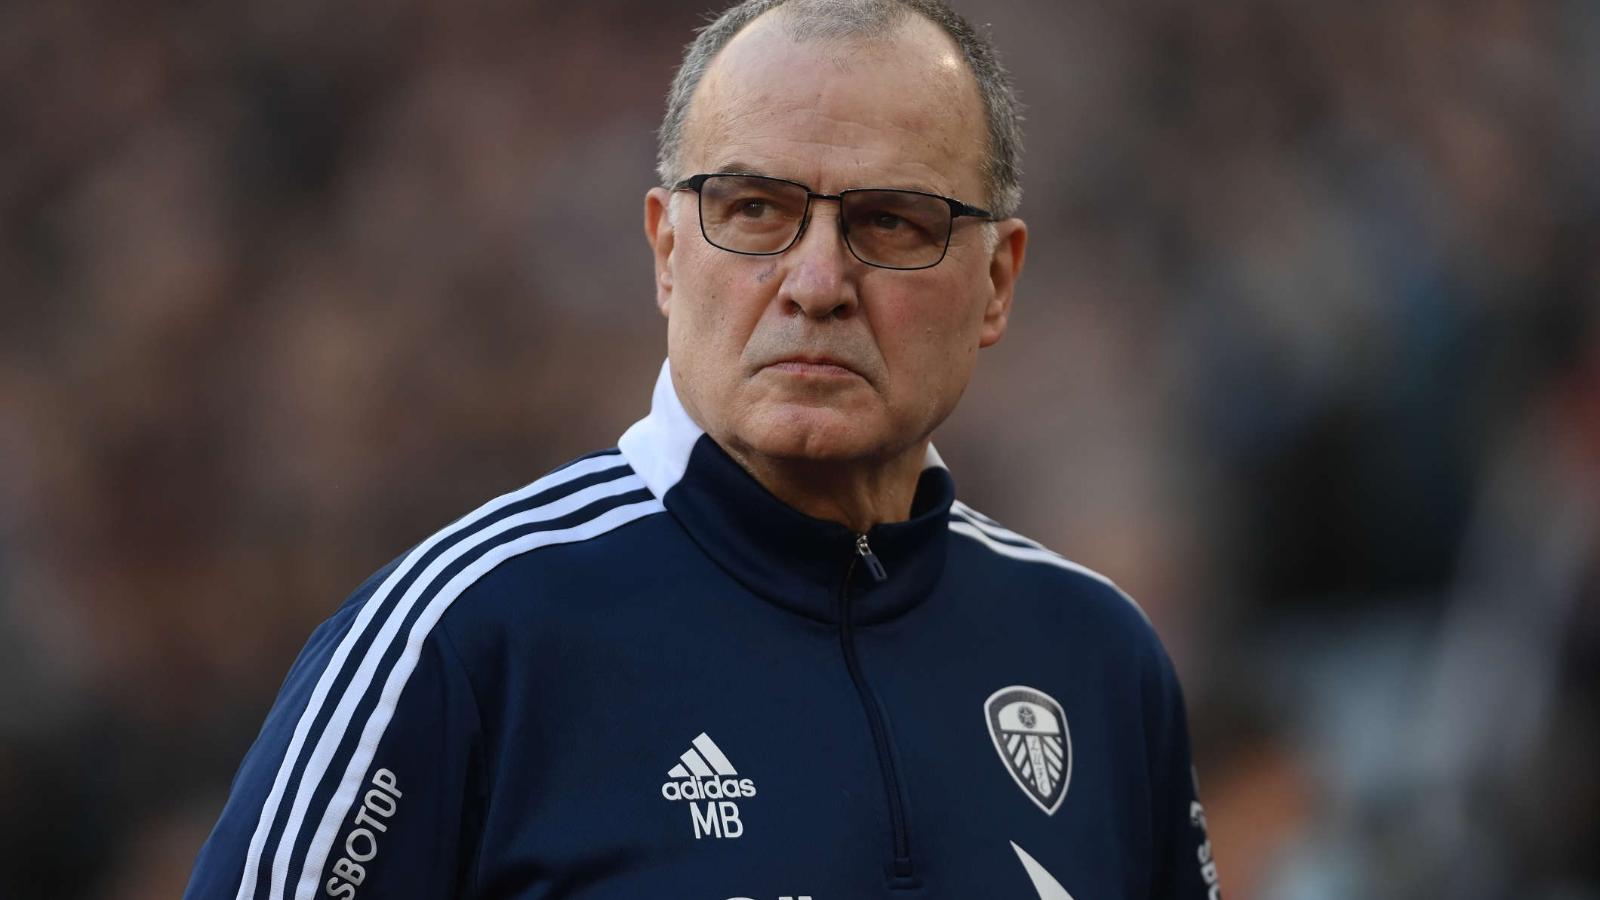 Marcelo Bielsa: information about his career